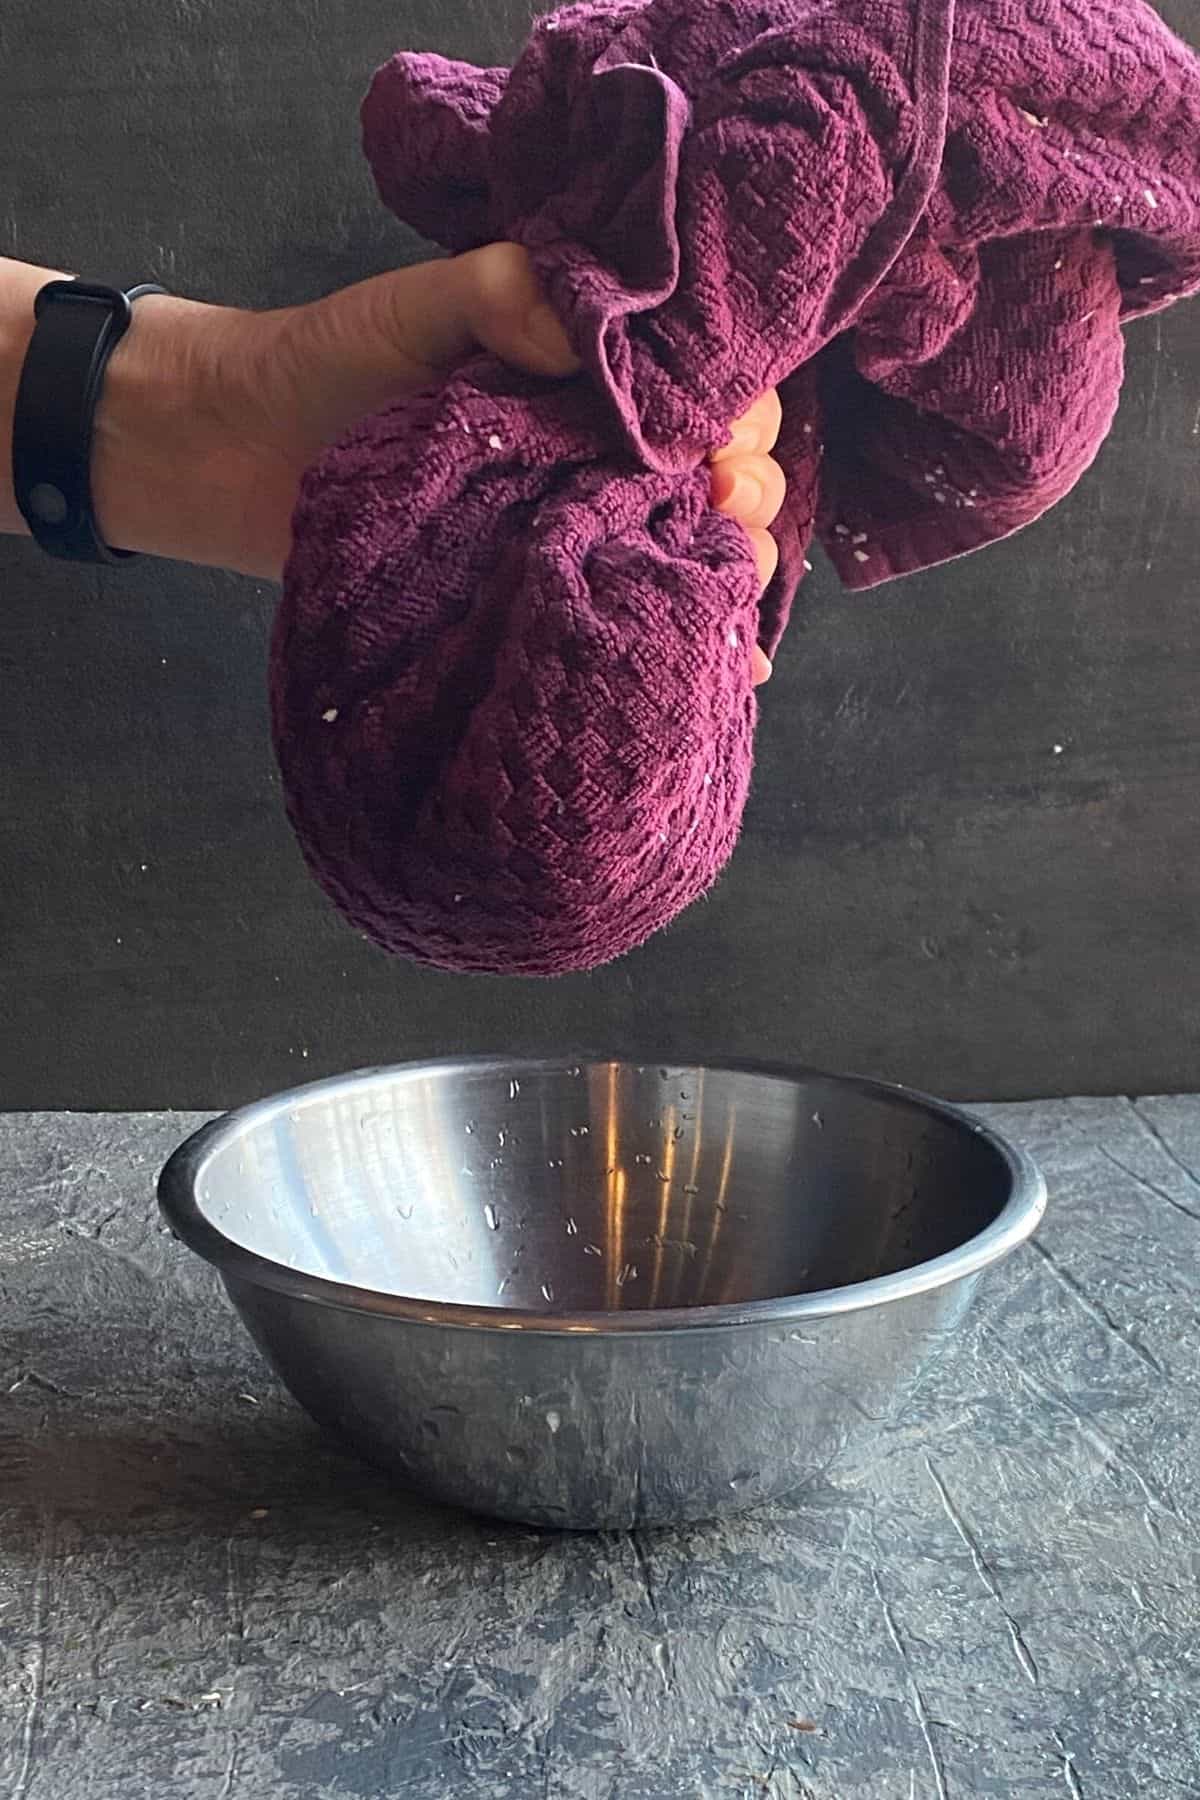 A purple cheesecloth of cauliflower being hand squeezed over a bowl